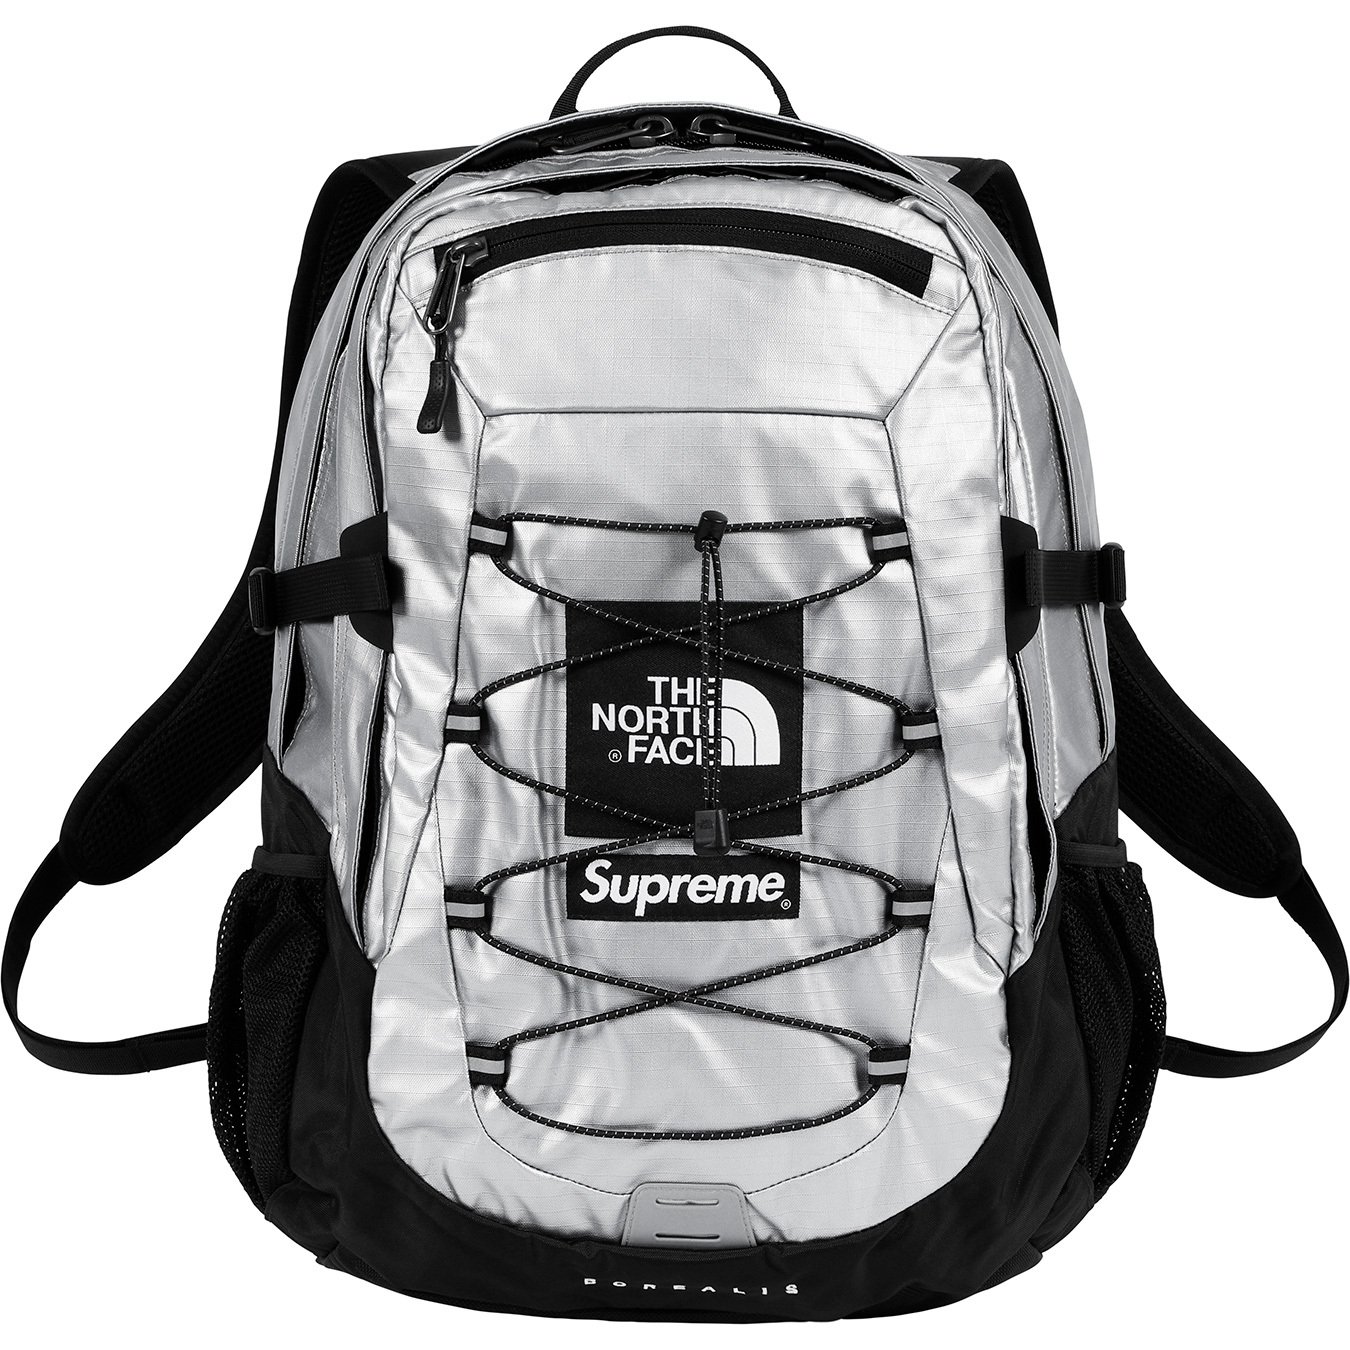 supreme×The North Face Metallic Backpack | www.myglobaltax.com